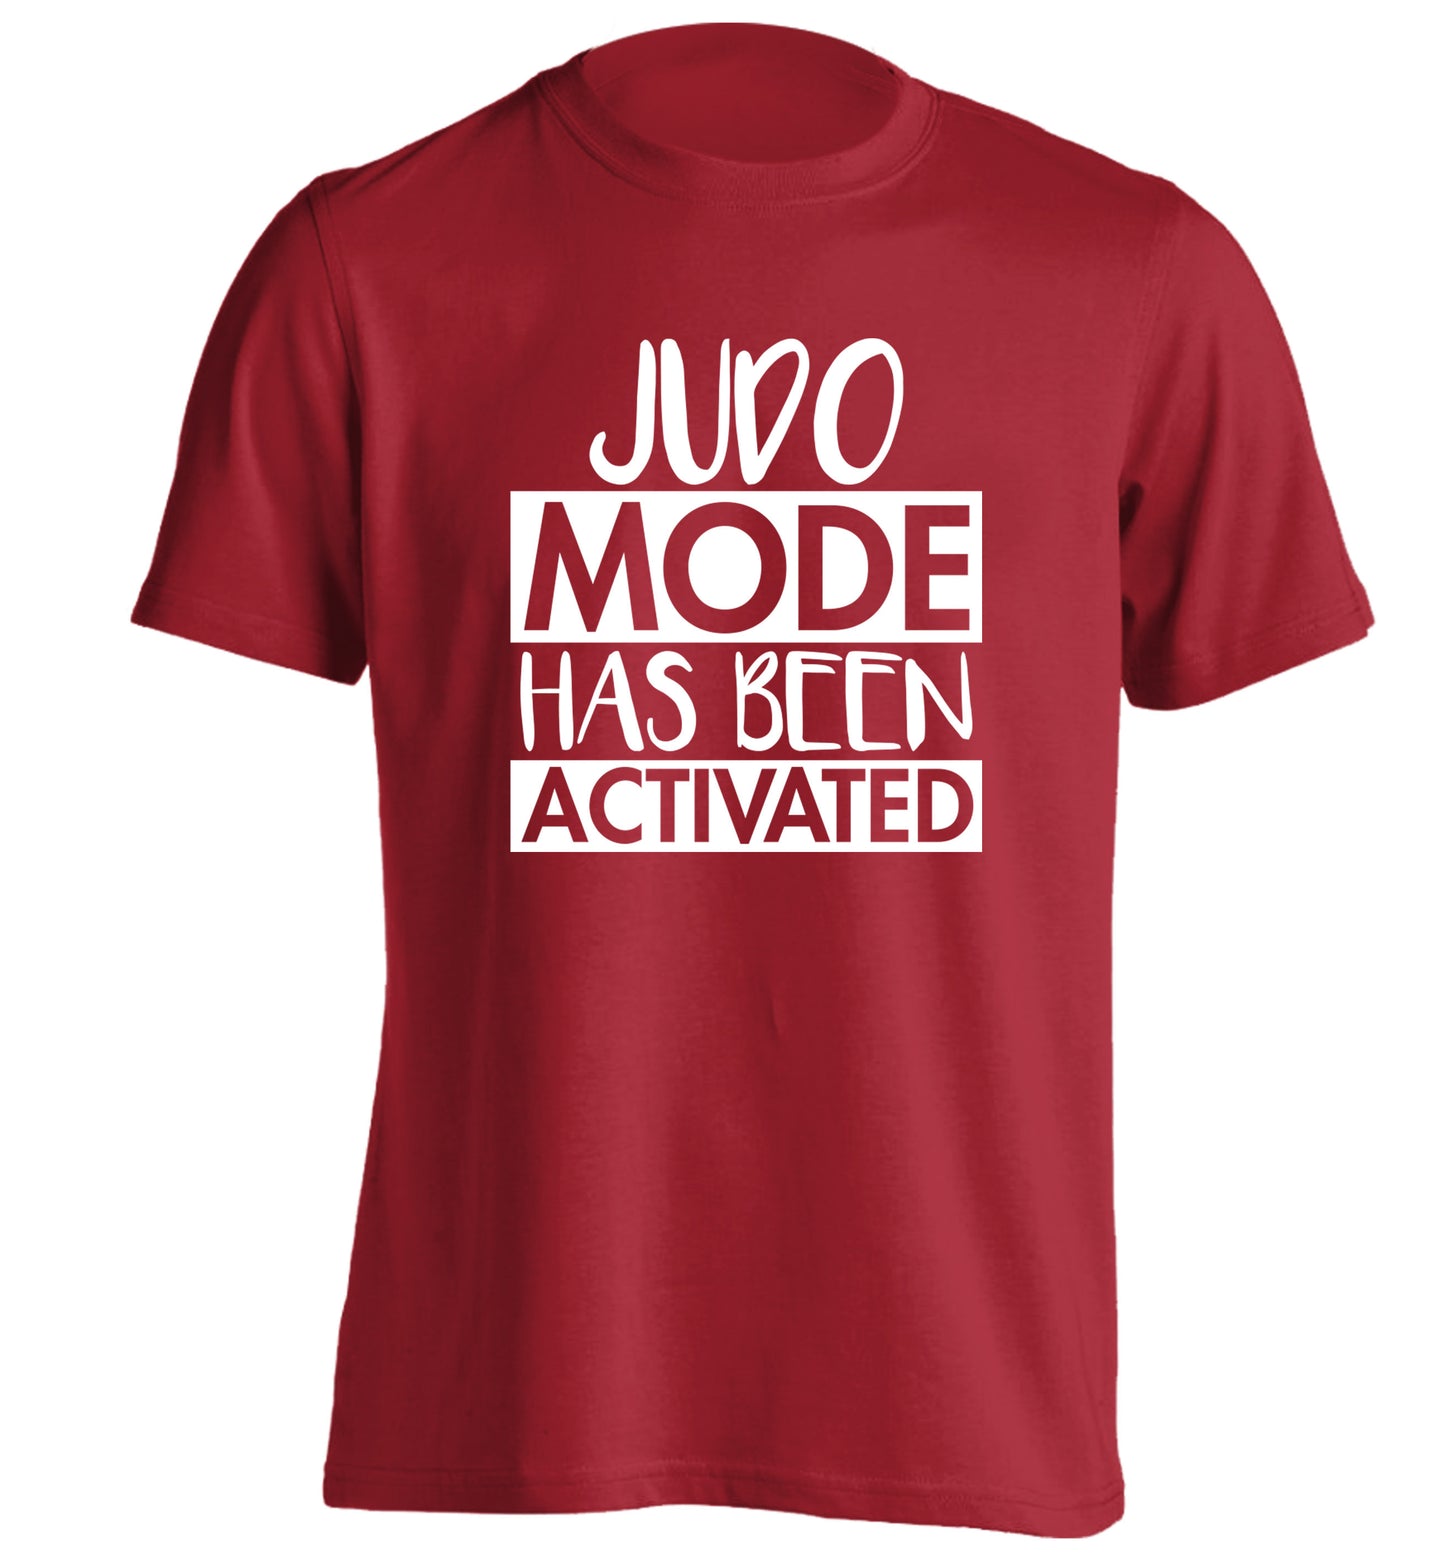 Judo mode activated adults unisex red Tshirt 2XL